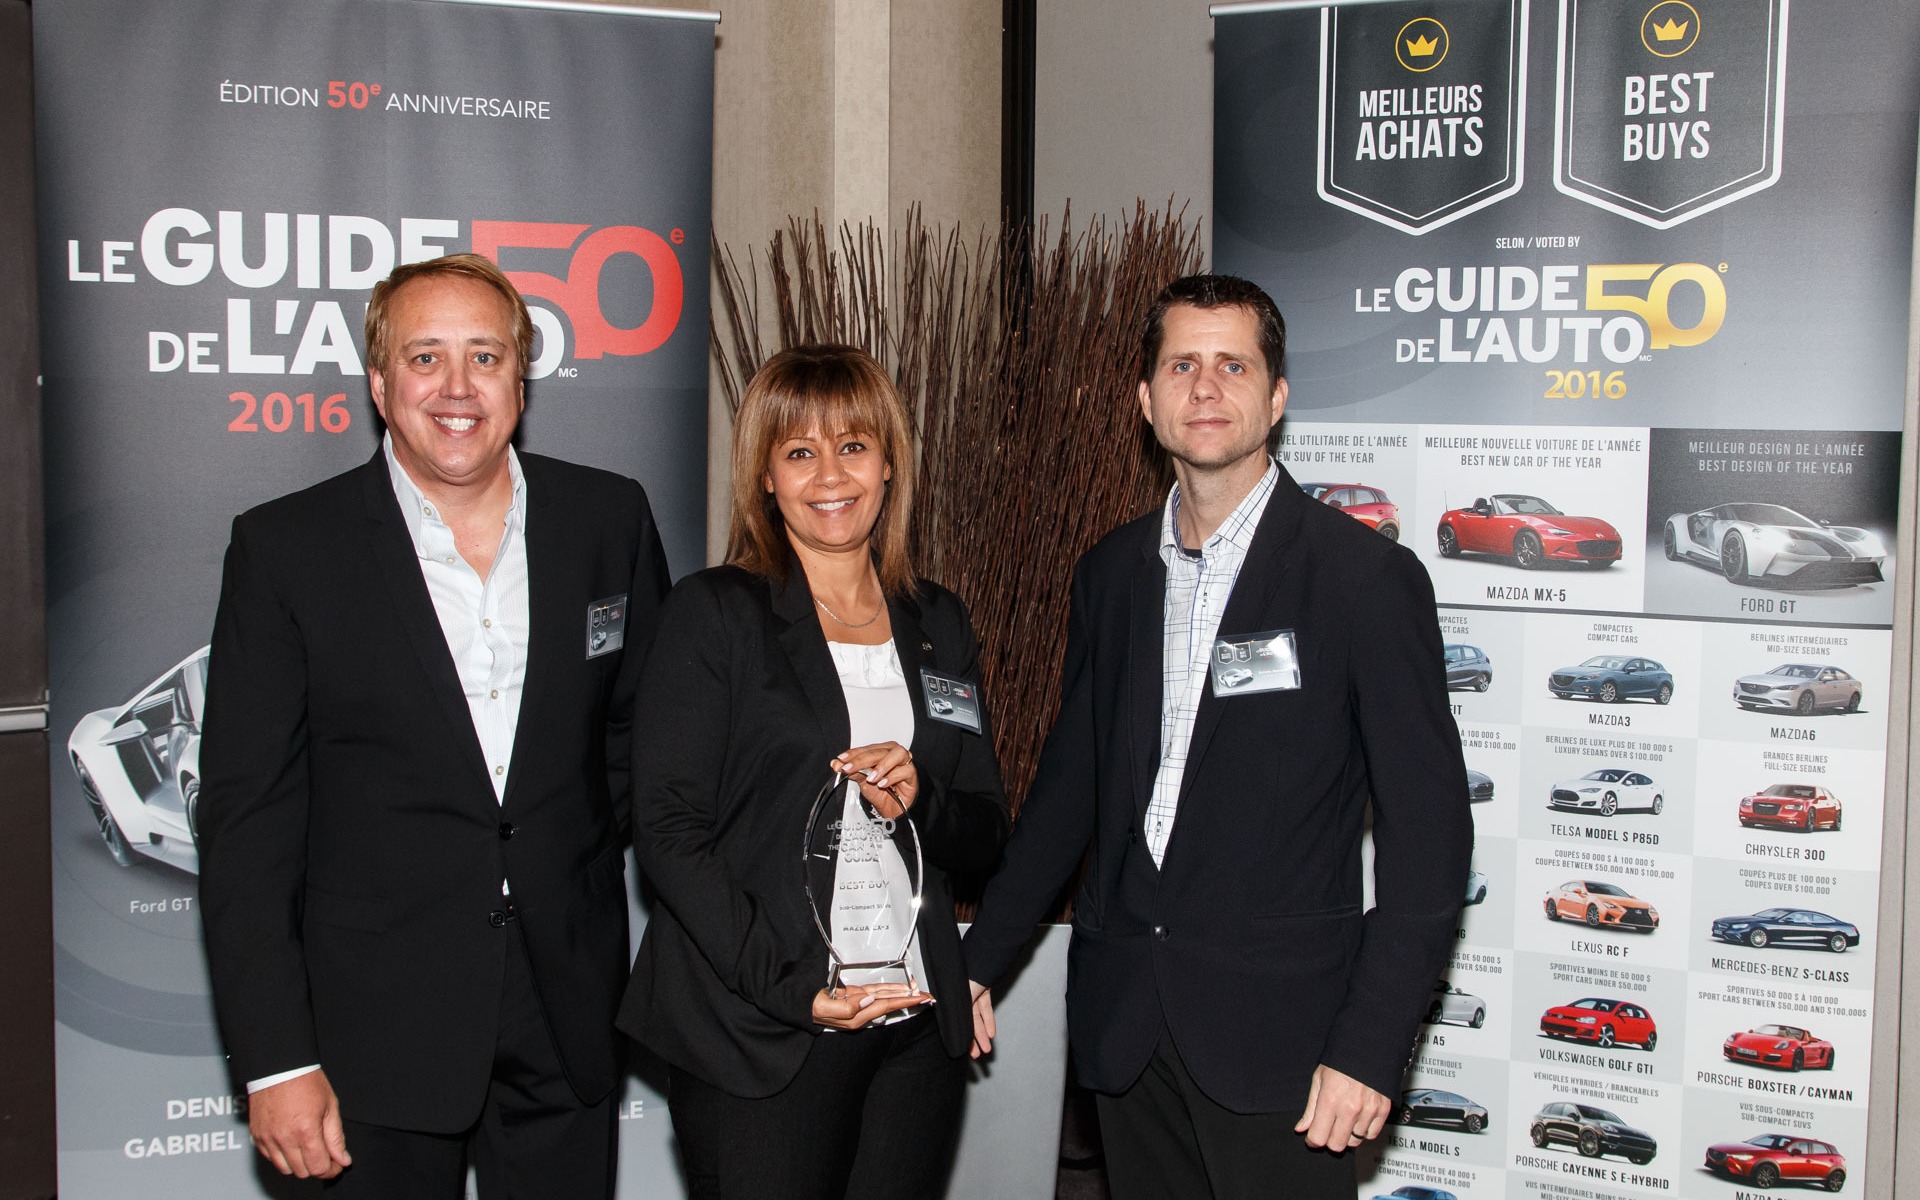 Sub-Compact SUV of the Year - Mazda CX-3, accepted by Rania Guirguis 